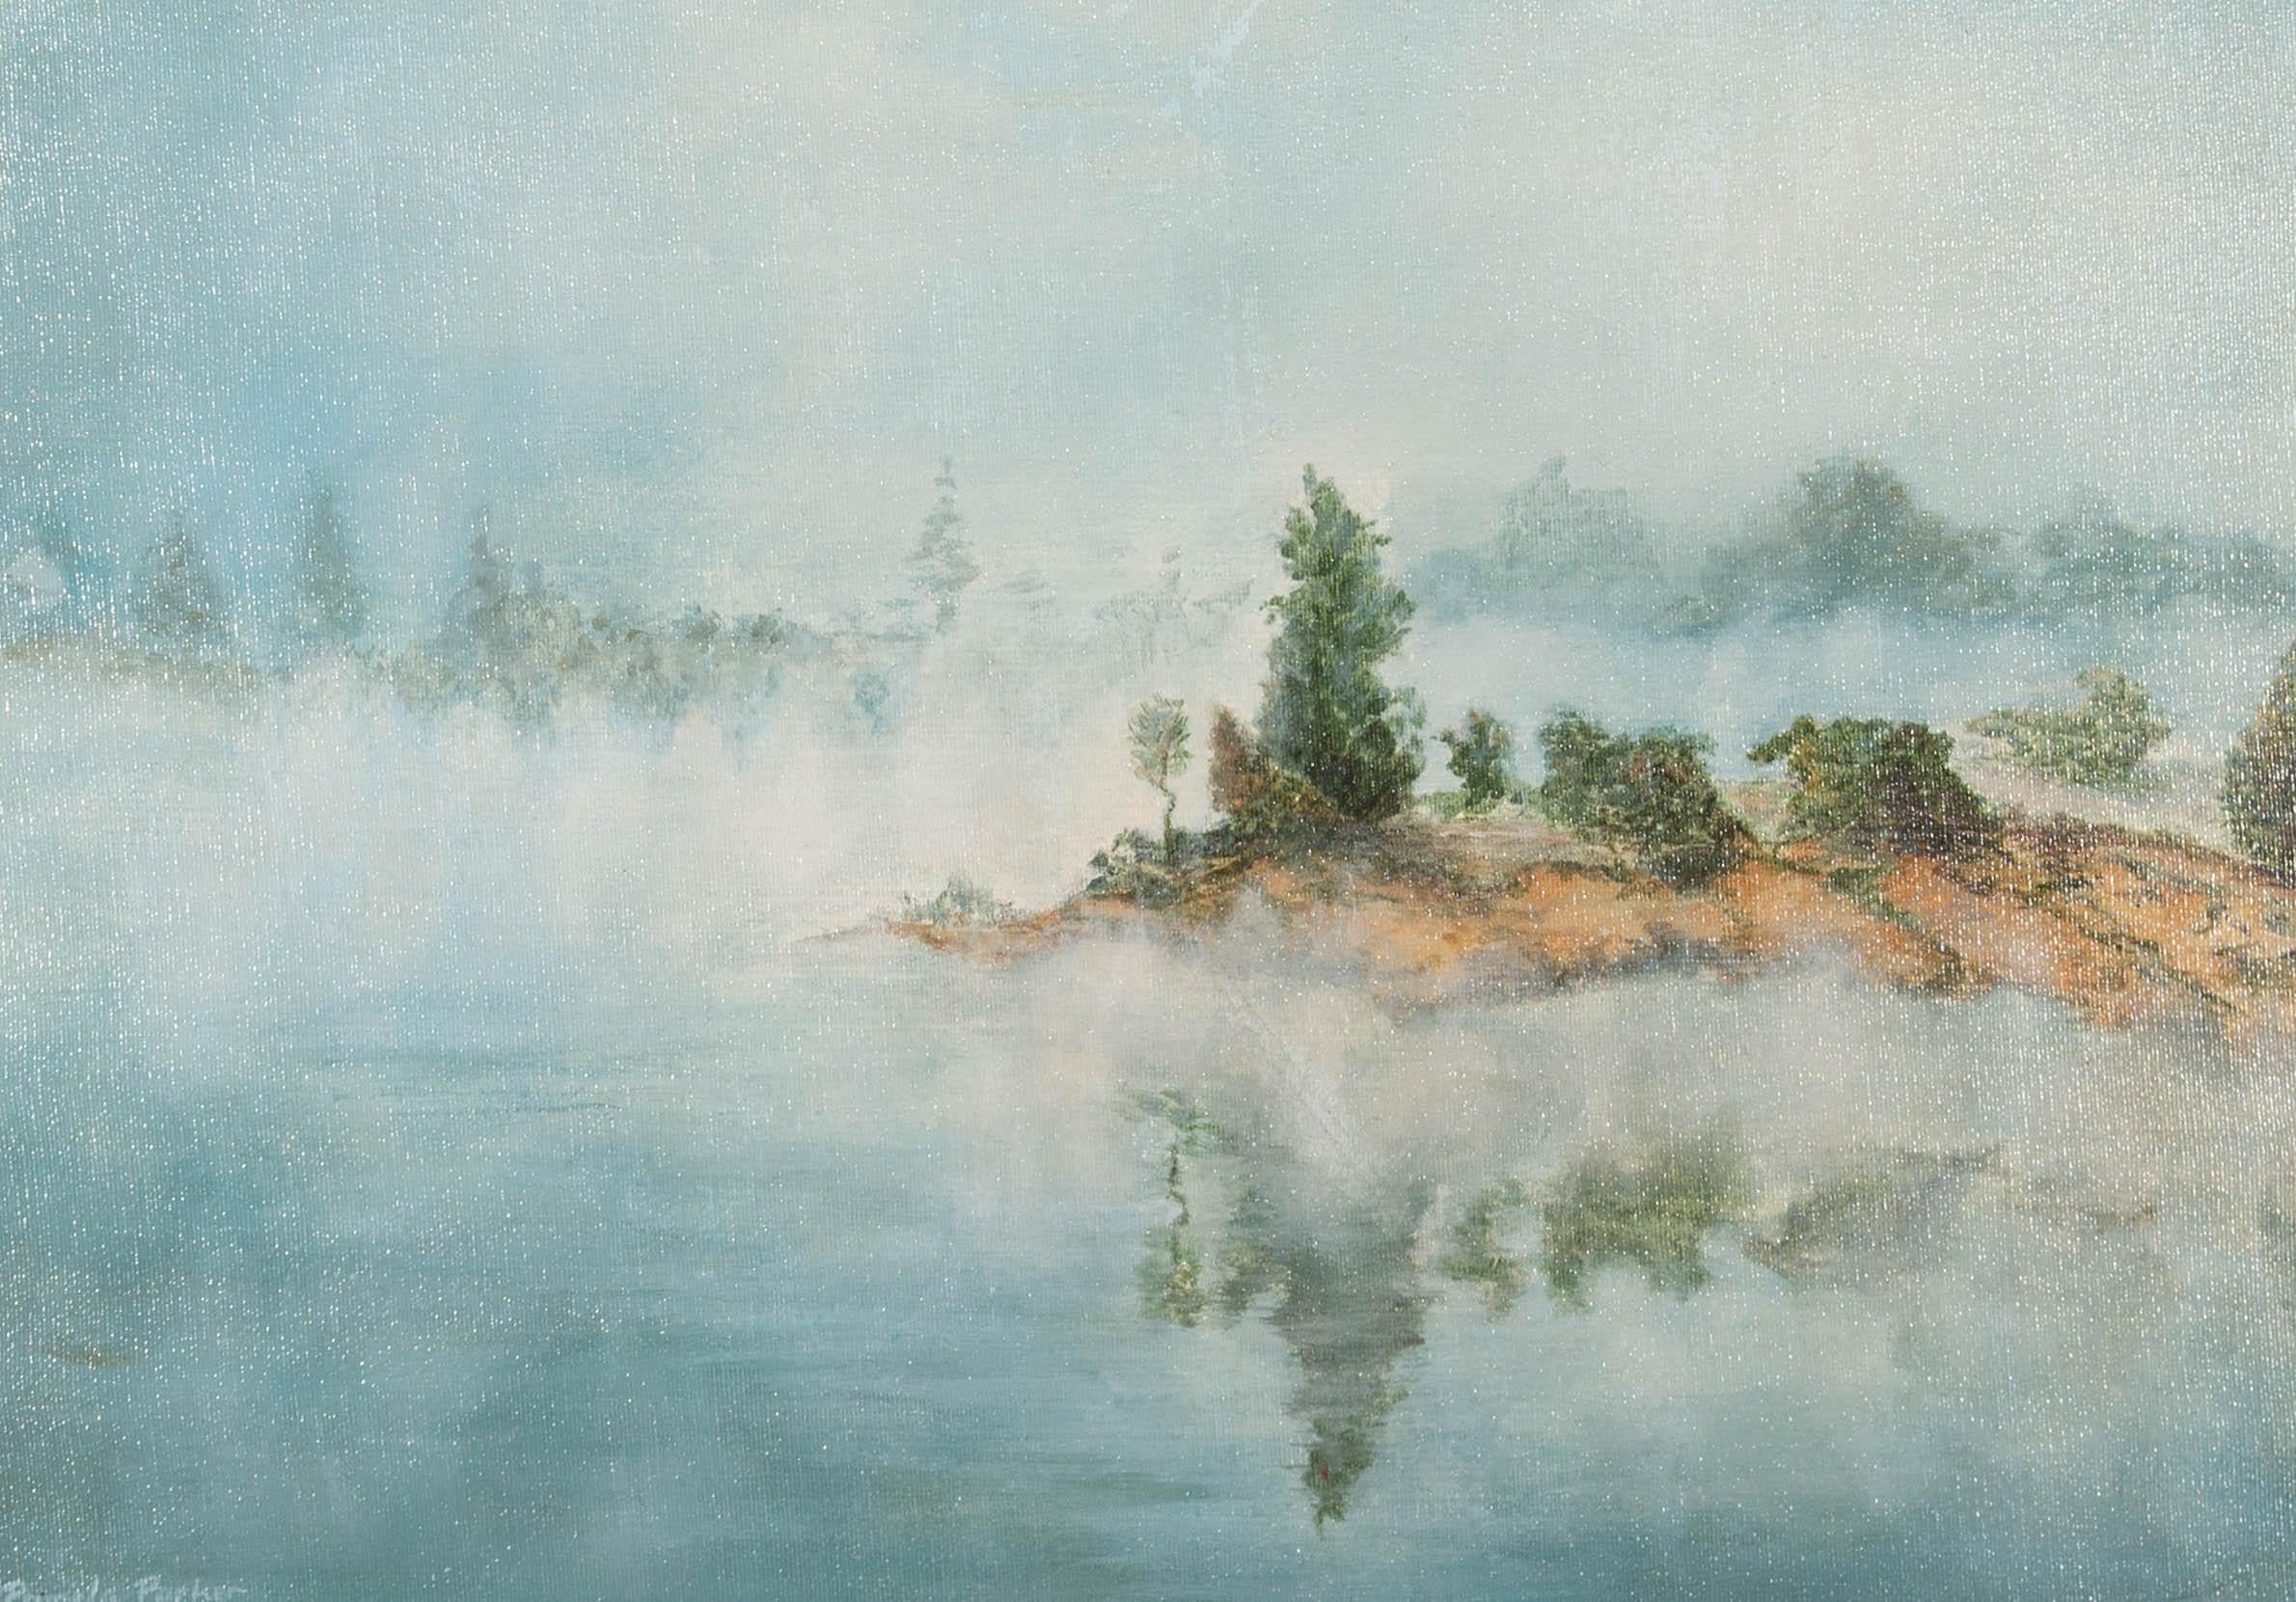 A misty landscape scene in oil by Pamela Parker. Signed to the lower left-hand corner. Presented in a distressed, off-white wooden frame, with an inner gilt detail, as shown. On canvas on stretchers.
